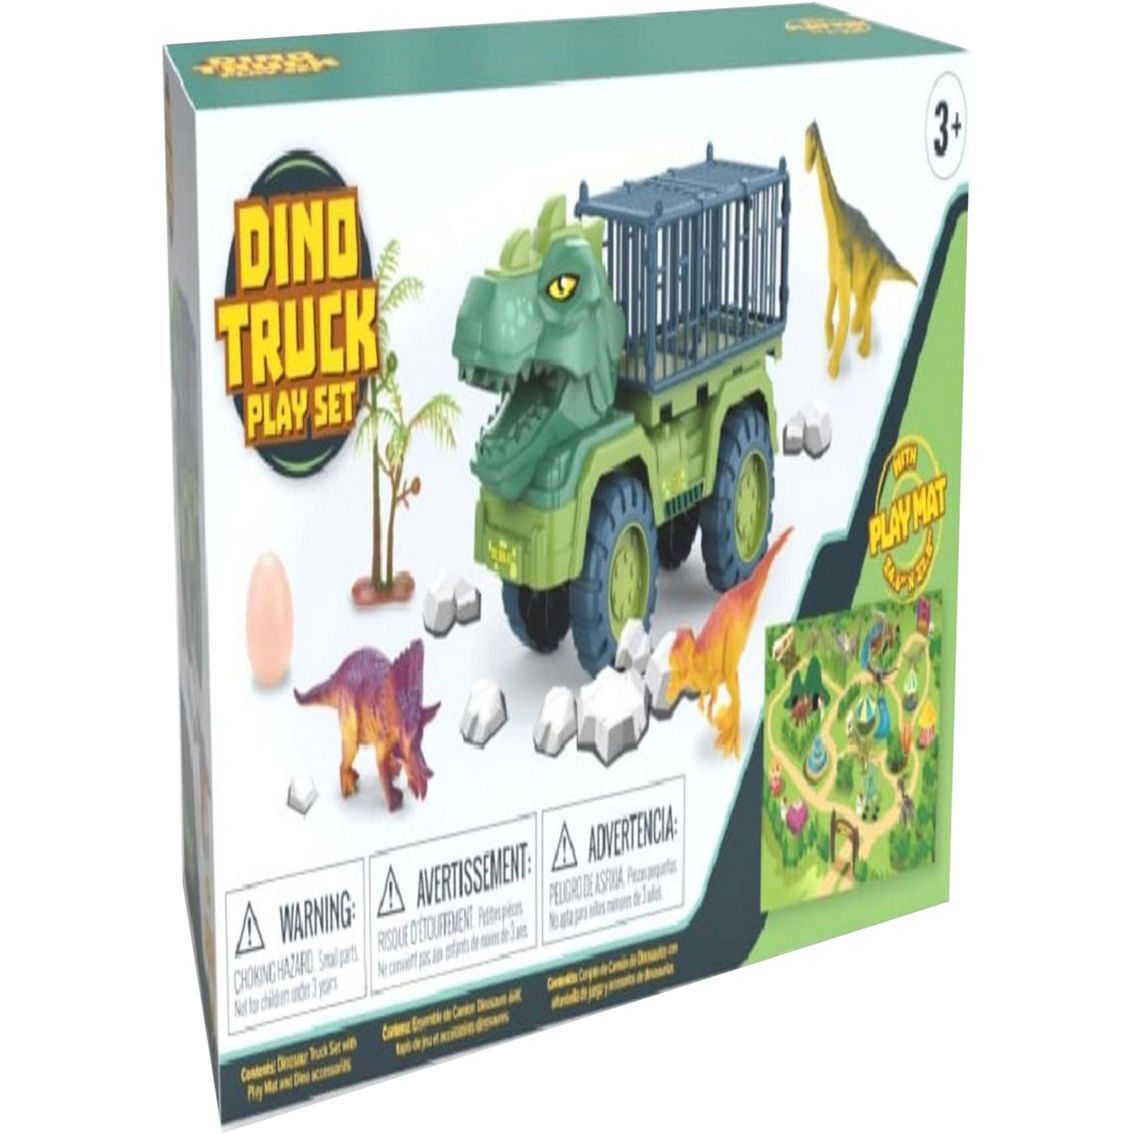 The Bubble Factory Dino Truck 16 pc. Play Set - Image 2 of 9